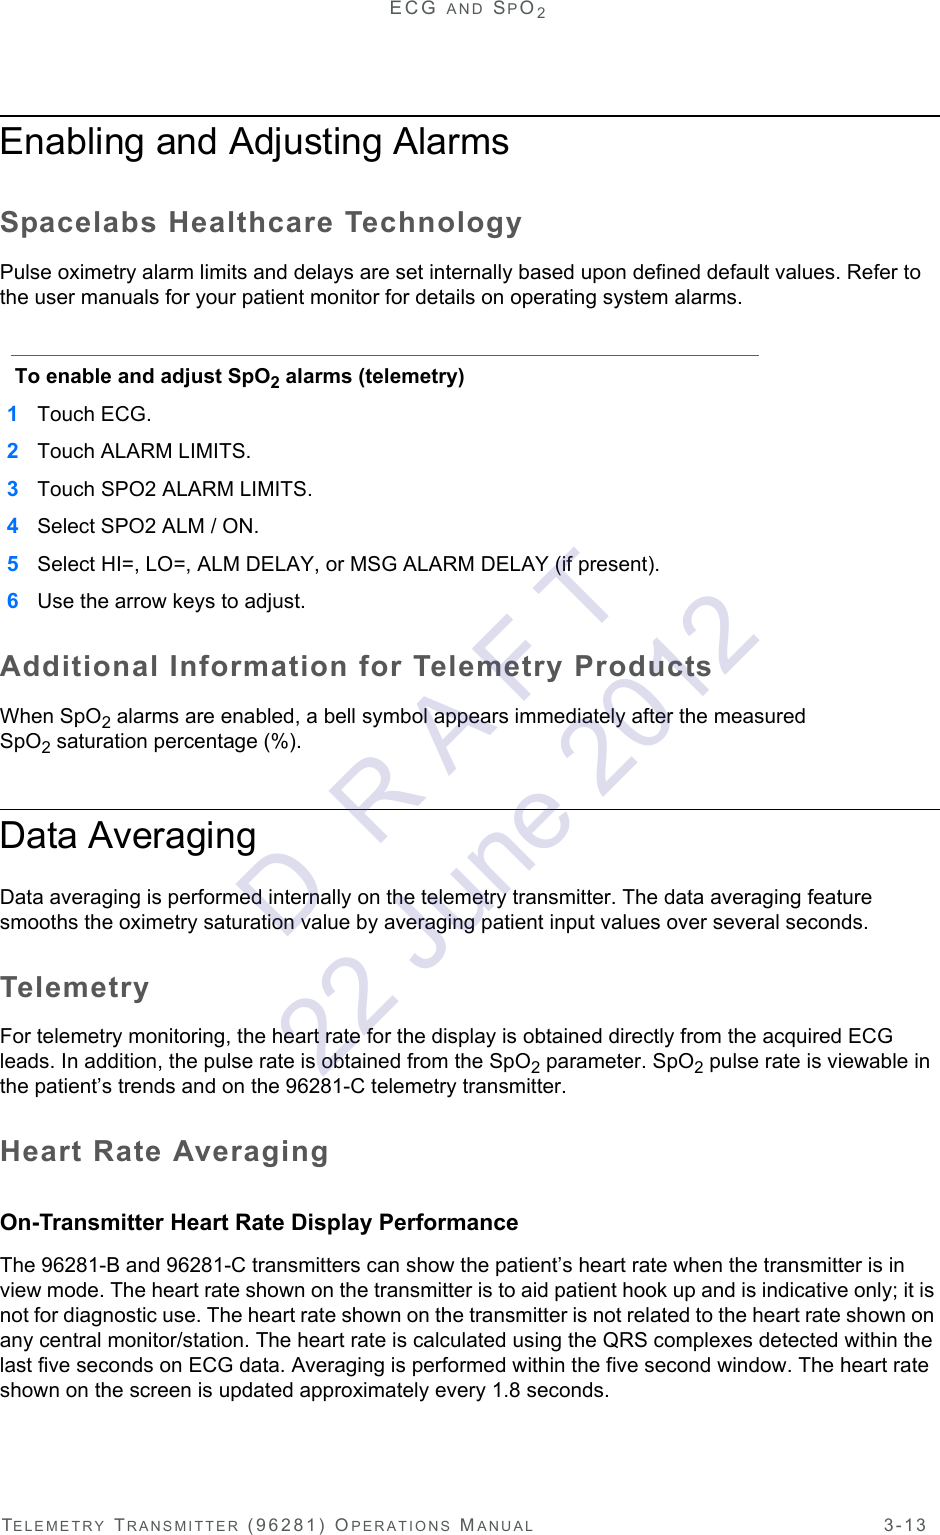 TELEMETRY TRANSMITTER (96281) OPERATIONS MANUAL 3-13ECG AND SPO2Enabling and Adjusting Alarms Spacelabs Healthcare TechnologyPulse oximetry alarm limits and delays are set internally based upon defined default values. Refer to the user manuals for your patient monitor for details on operating system alarms.To enable and adjust SpO2 alarms (telemetry)1Touch ECG. 2Touch ALARM LIMITS.3Touch SPO2 ALARM LIMITS.4Select SPO2 ALM / ON. 5Select HI=, LO=, ALM DELAY, or MSG ALARM DELAY (if present).6Use the arrow keys to adjust.Additional Information for Telemetry ProductsWhen SpO2 alarms are enabled, a bell symbol appears immediately after the measured SpO2saturation percentage (%).Data AveragingData averaging is performed internally on the telemetry transmitter. The data averaging feature smooths the oximetry saturation value by averaging patient input values over several seconds. TelemetryFor telemetry monitoring, the heart rate for the display is obtained directly from the acquired ECG leads. In addition, the pulse rate is obtained from the SpO2 parameter. SpO2 pulse rate is viewable in the patient’s trends and on the 96281-C telemetry transmitter.Heart Rate AveragingOn-Transmitter Heart Rate Display PerformanceThe 96281-B and 96281-C transmitters can show the patient’s heart rate when the transmitter is in view mode. The heart rate shown on the transmitter is to aid patient hook up and is indicative only; it is not for diagnostic use. The heart rate shown on the transmitter is not related to the heart rate shown on any central monitor/station. The heart rate is calculated using the QRS complexes detected within the last five seconds on ECG data. Averaging is performed within the five second window. The heart rate shown on the screen is updated approximately every 1.8 seconds.D  R A F T 22 June 2012